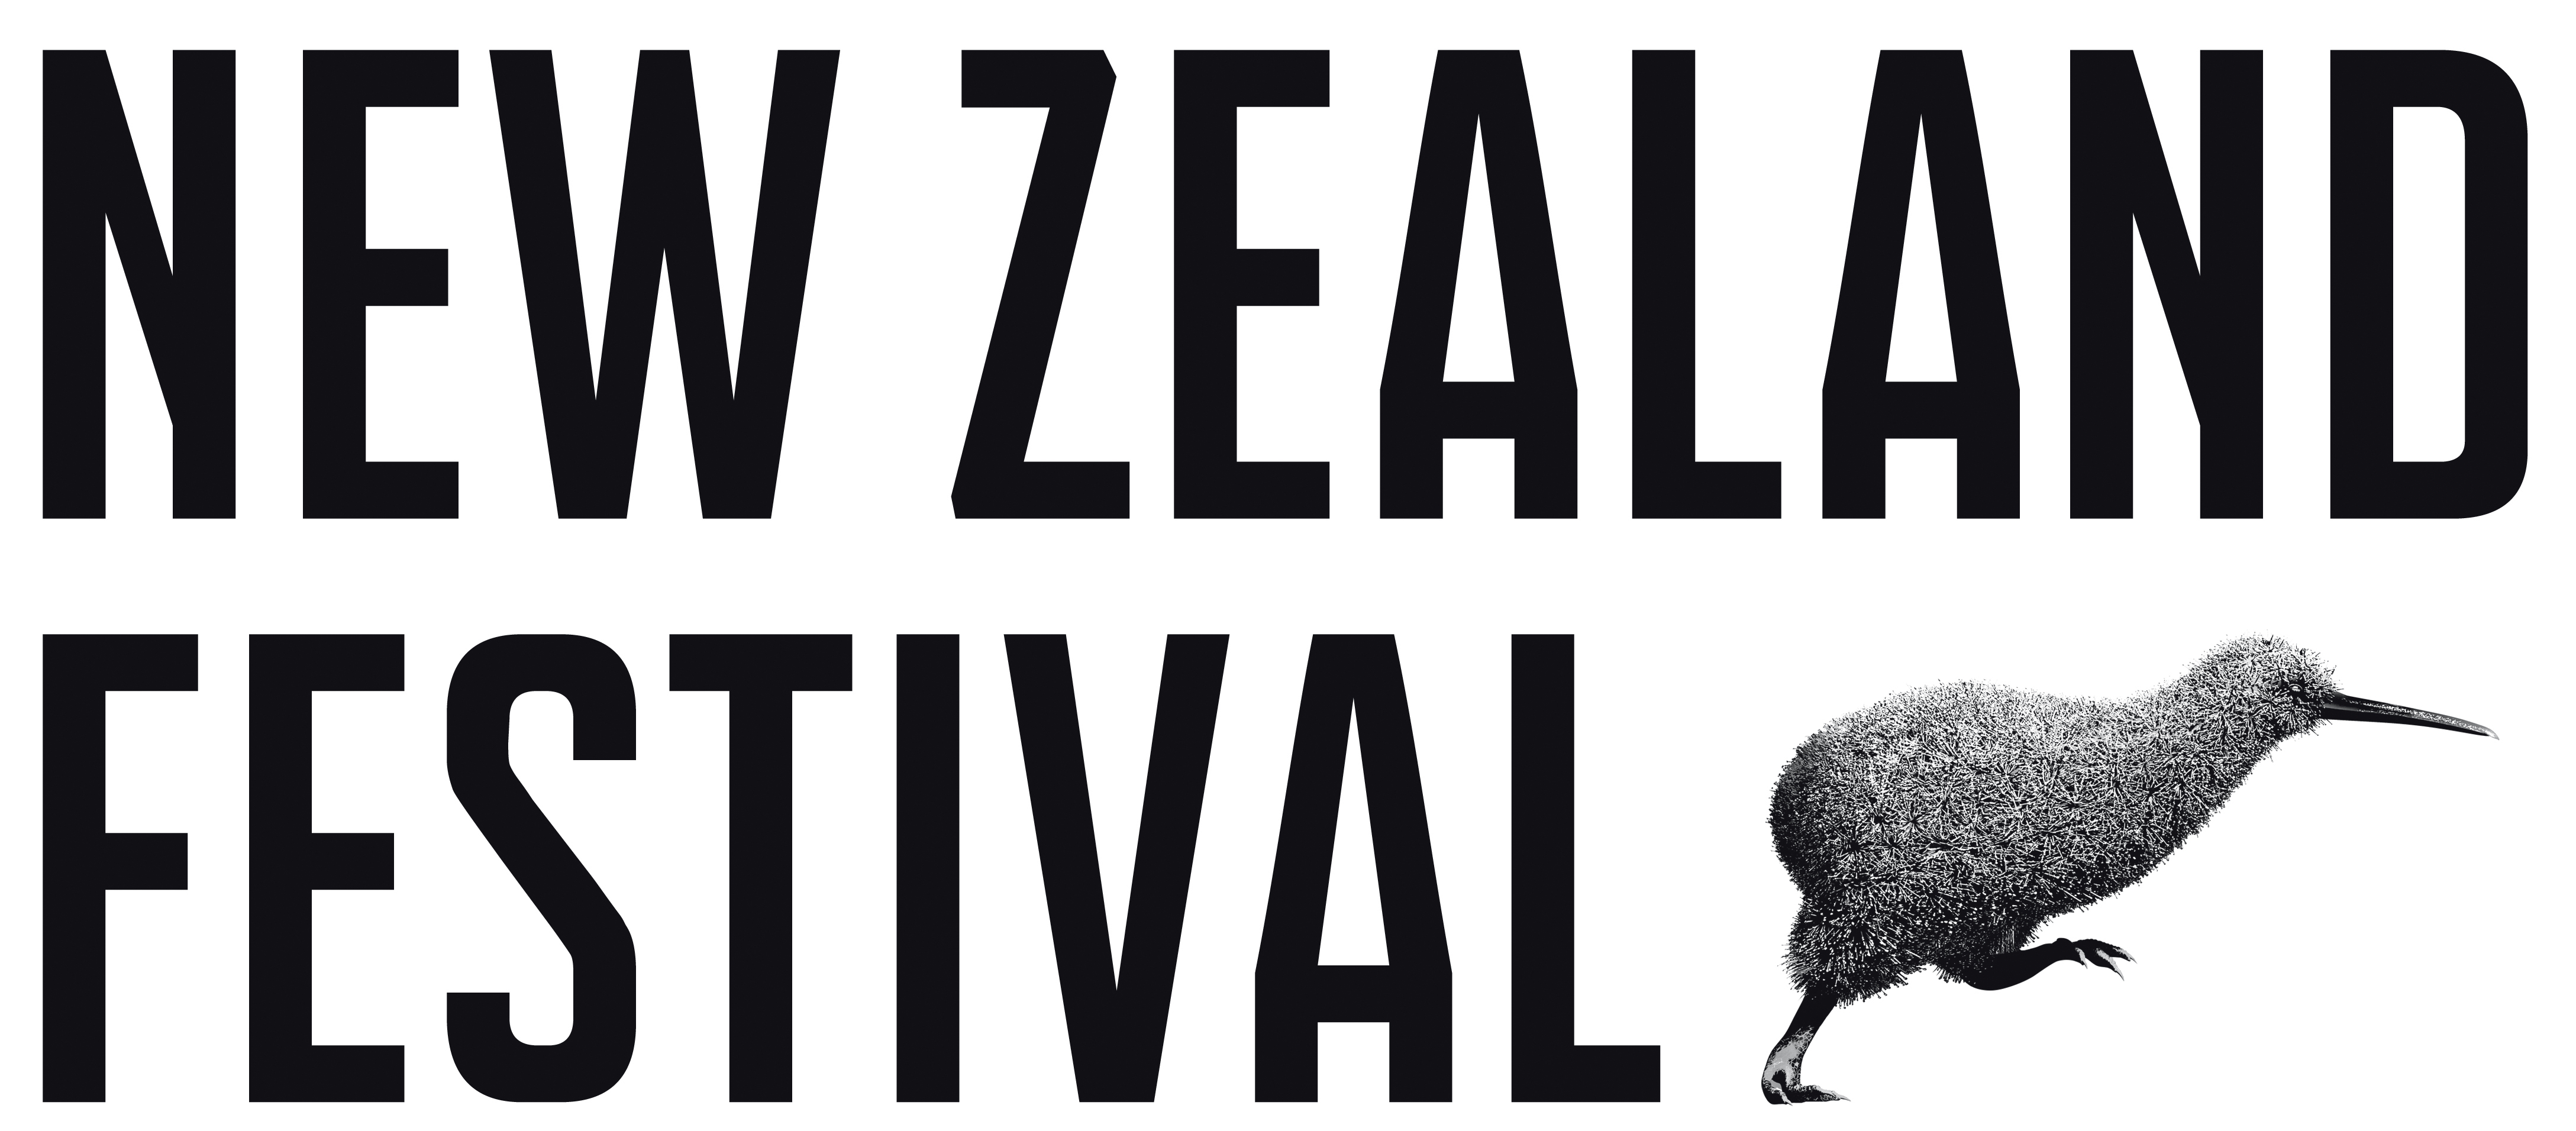 NEW ZEALAND FESTIVAL LOGO for general use